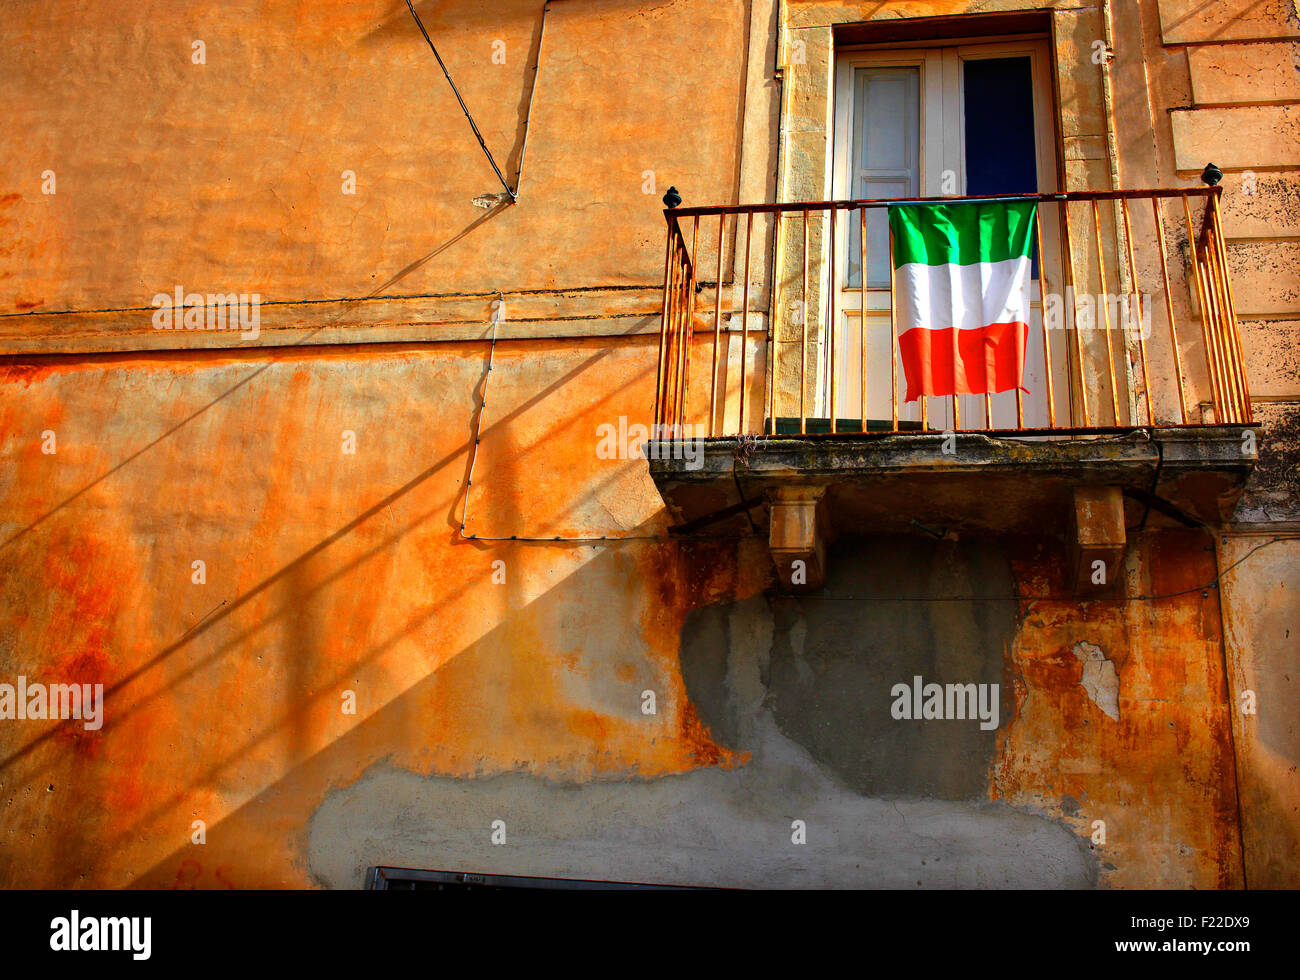 Old building in Fontecchio, Italy, showing Italian flag, balcony and orange stucco. Stock Photo